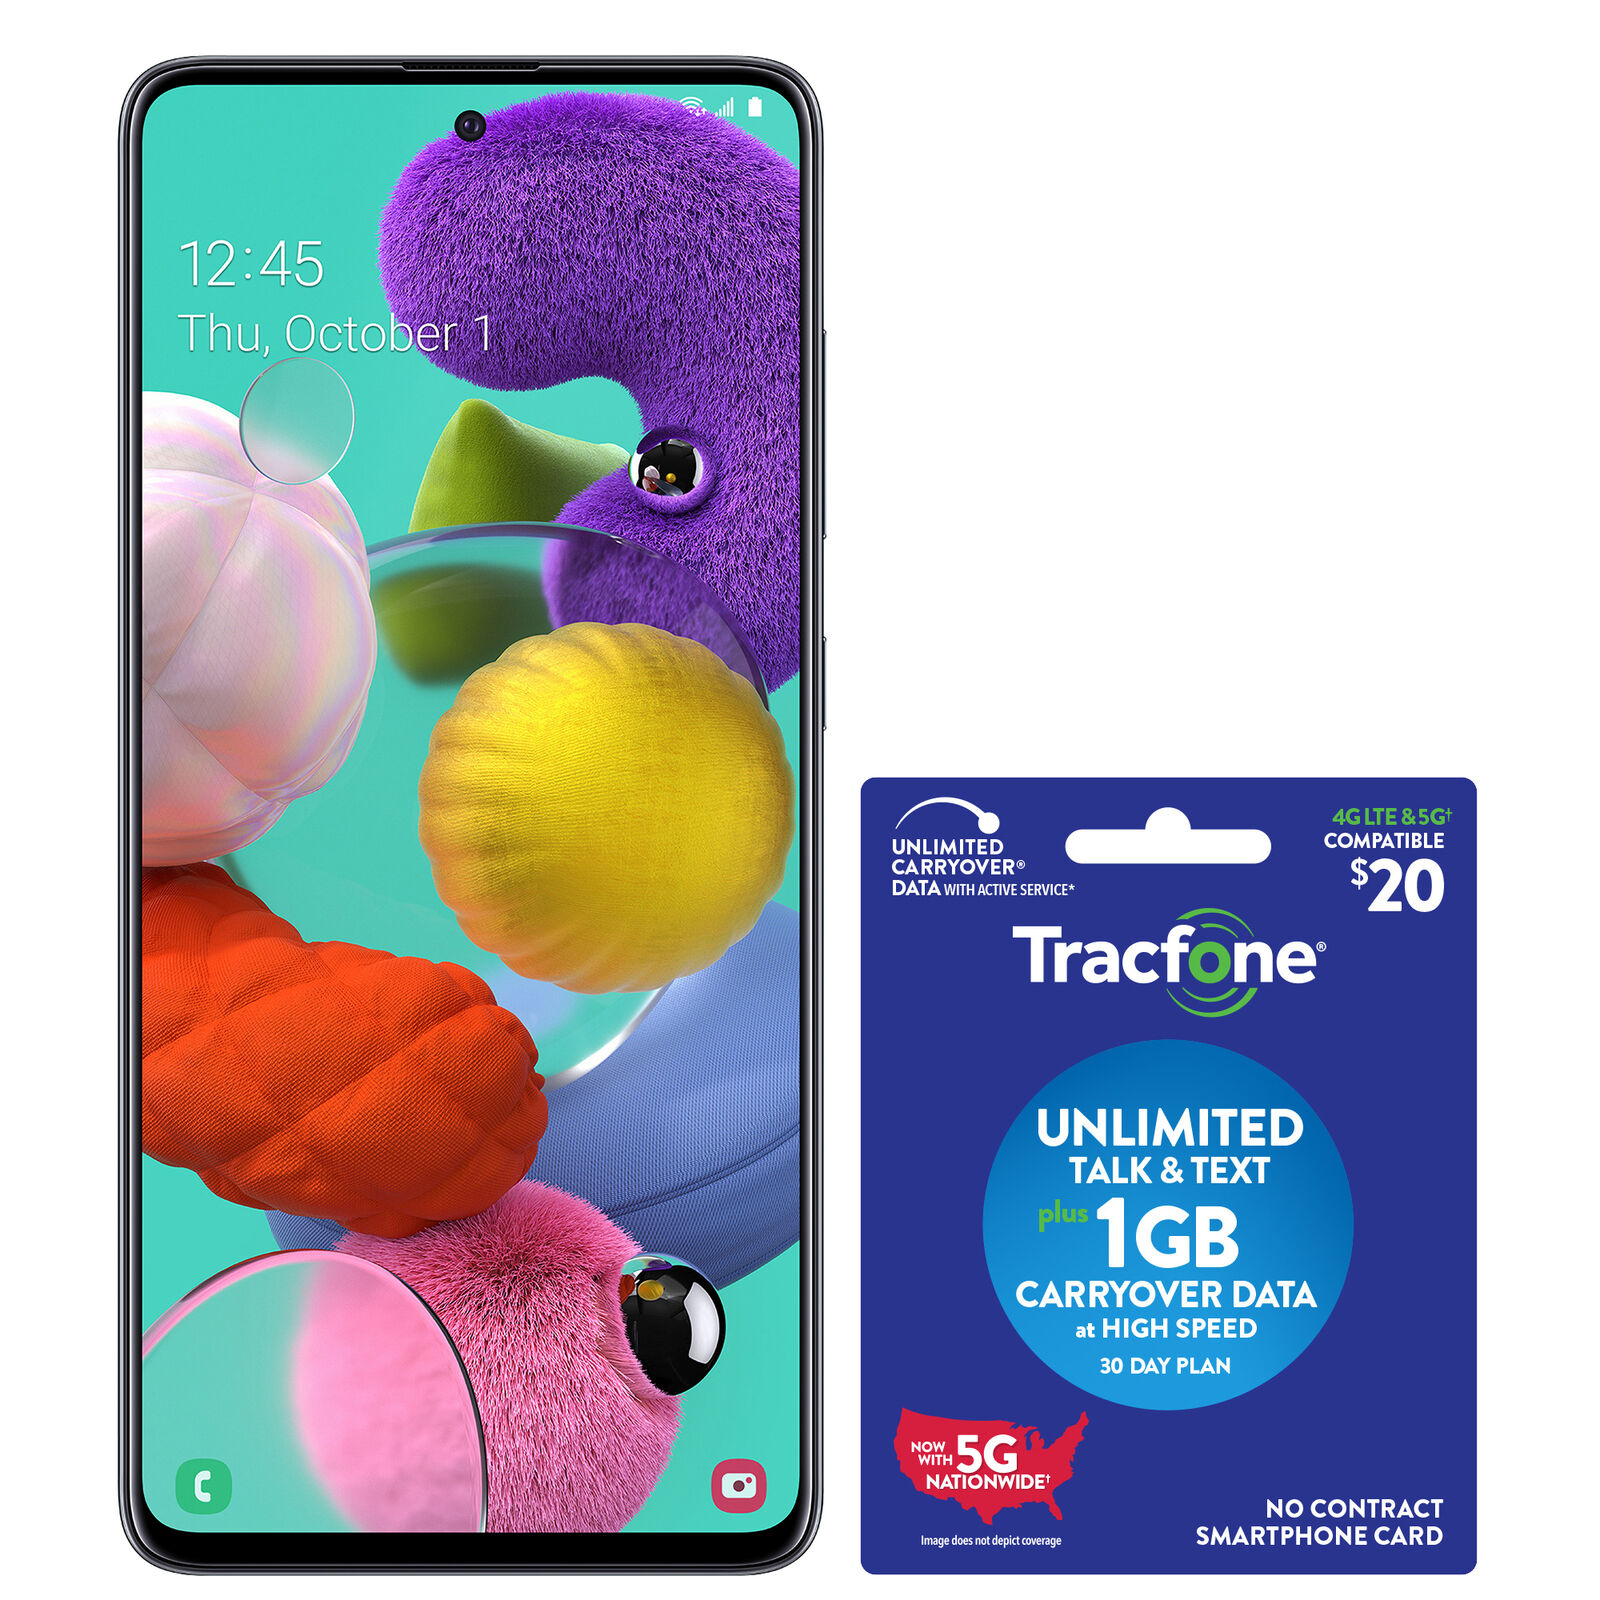 Tracfone Samsung Galaxy A51 + $20 Airtime Card - Excellent Refurbished $79.99